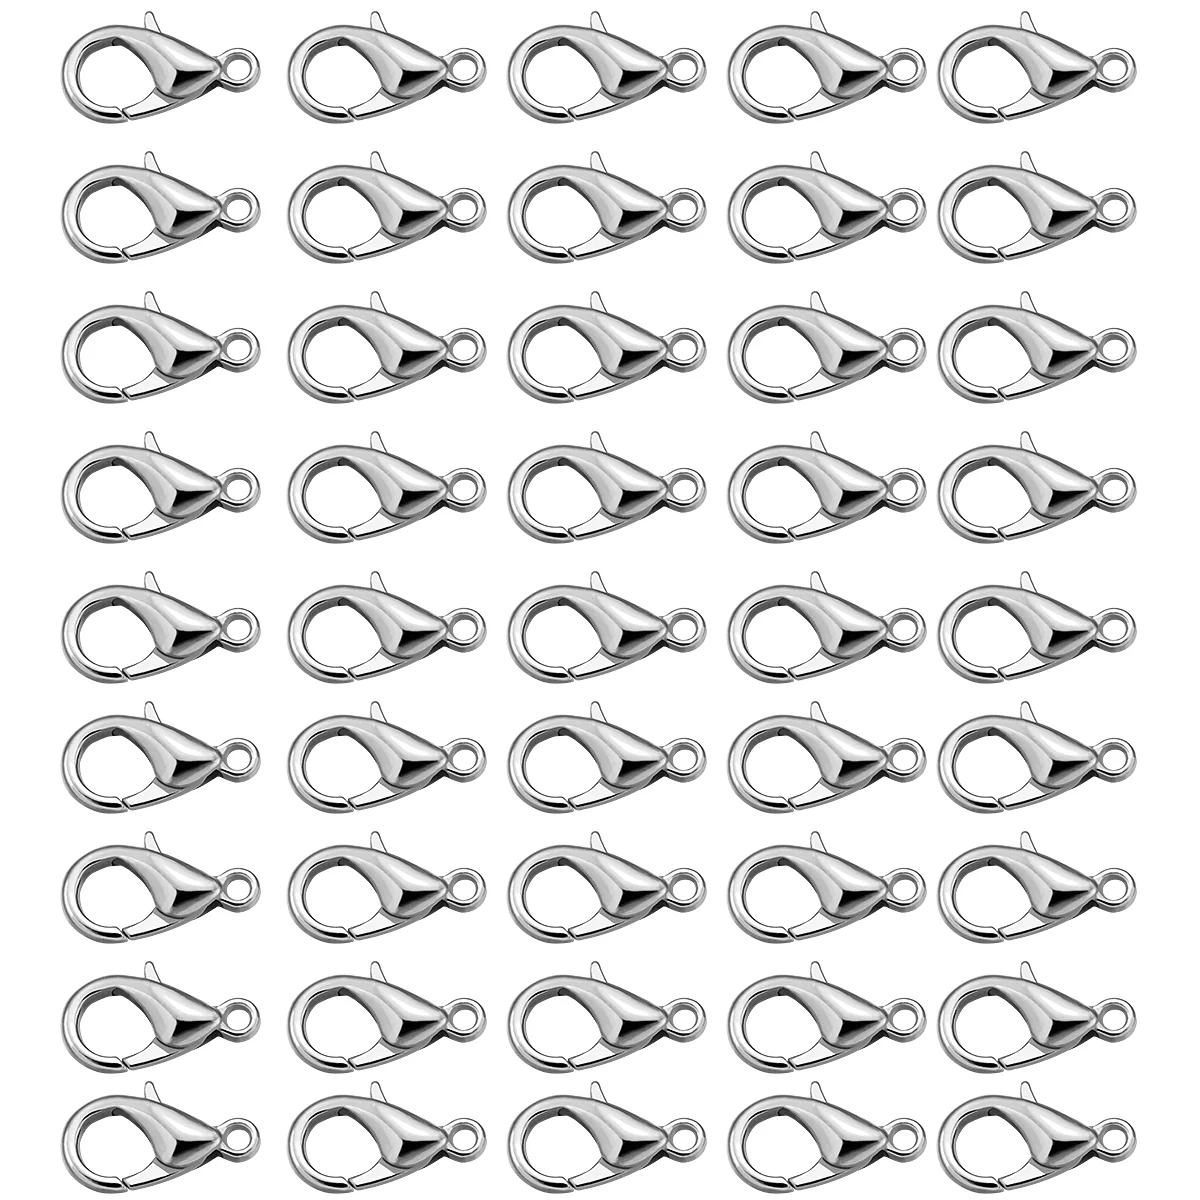 

Rosenice 100pcs Curved Lobster Clasps Lobster Claw Clasps DIY Jewelry Fastener Hook Necklace DIY Fasteners (White)